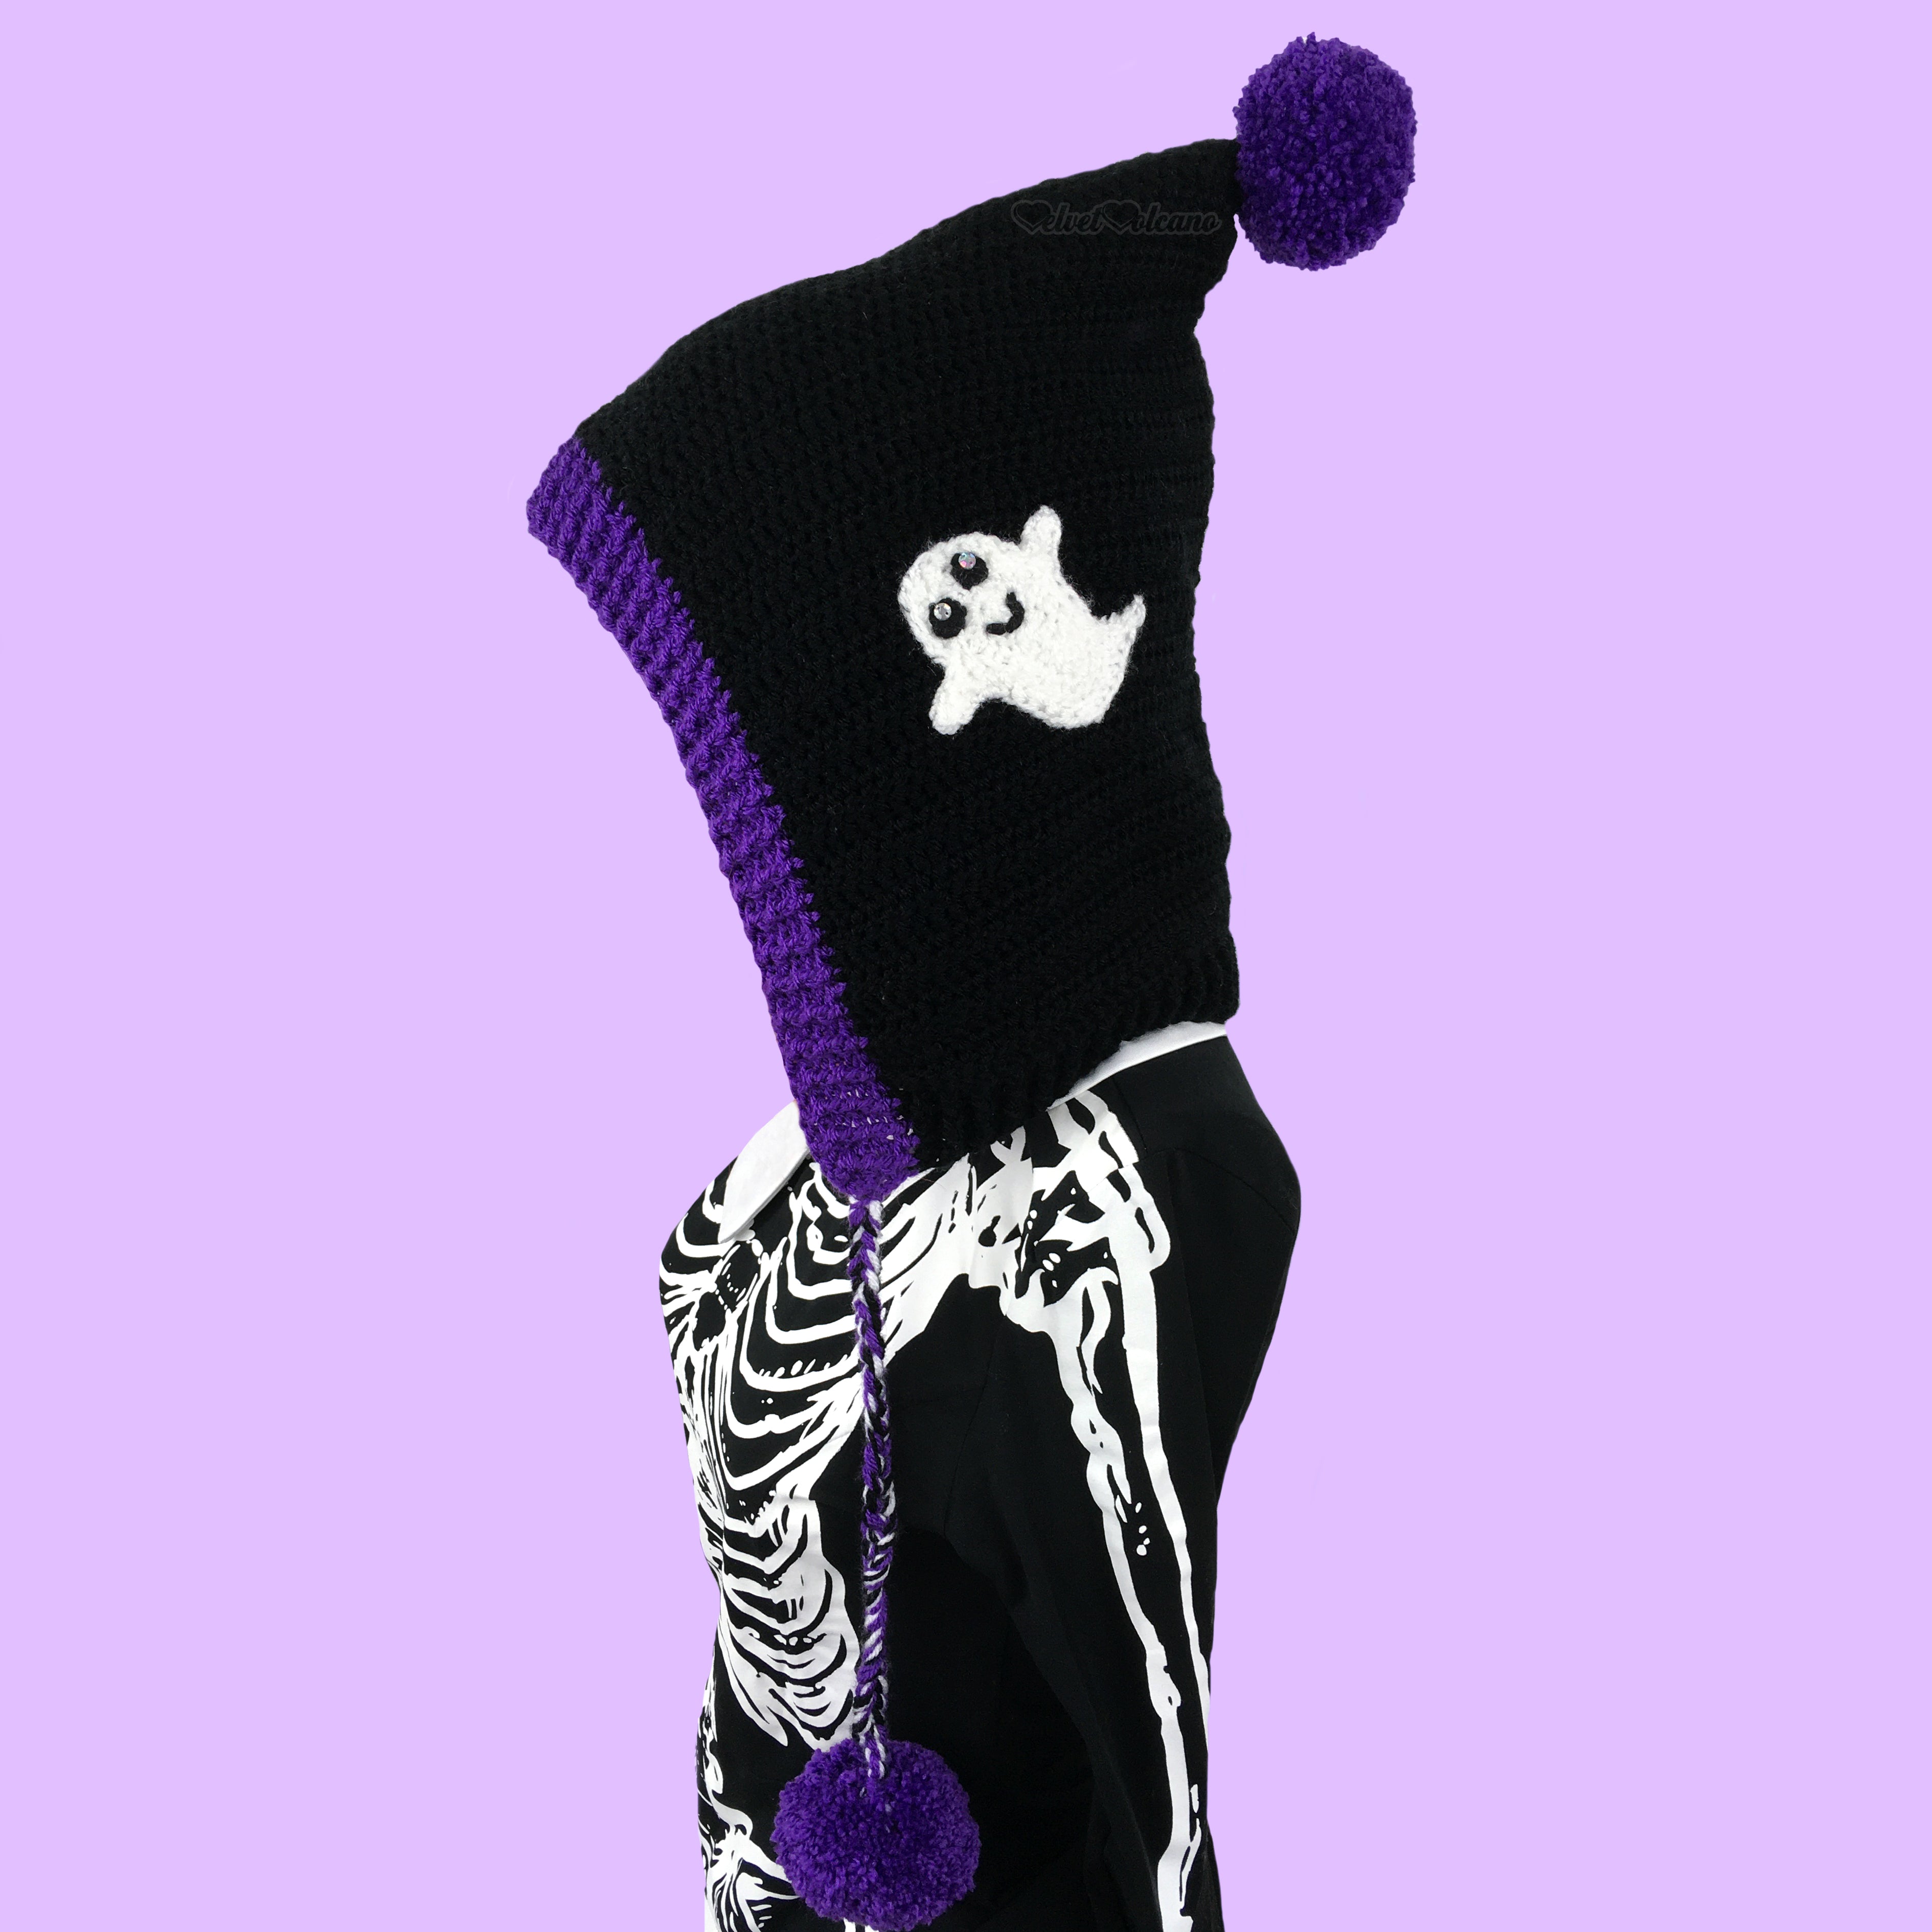 A black crocheted pixie hood with white ghost applique, purple trim, ties and a purple pom pom at the point of the hood.